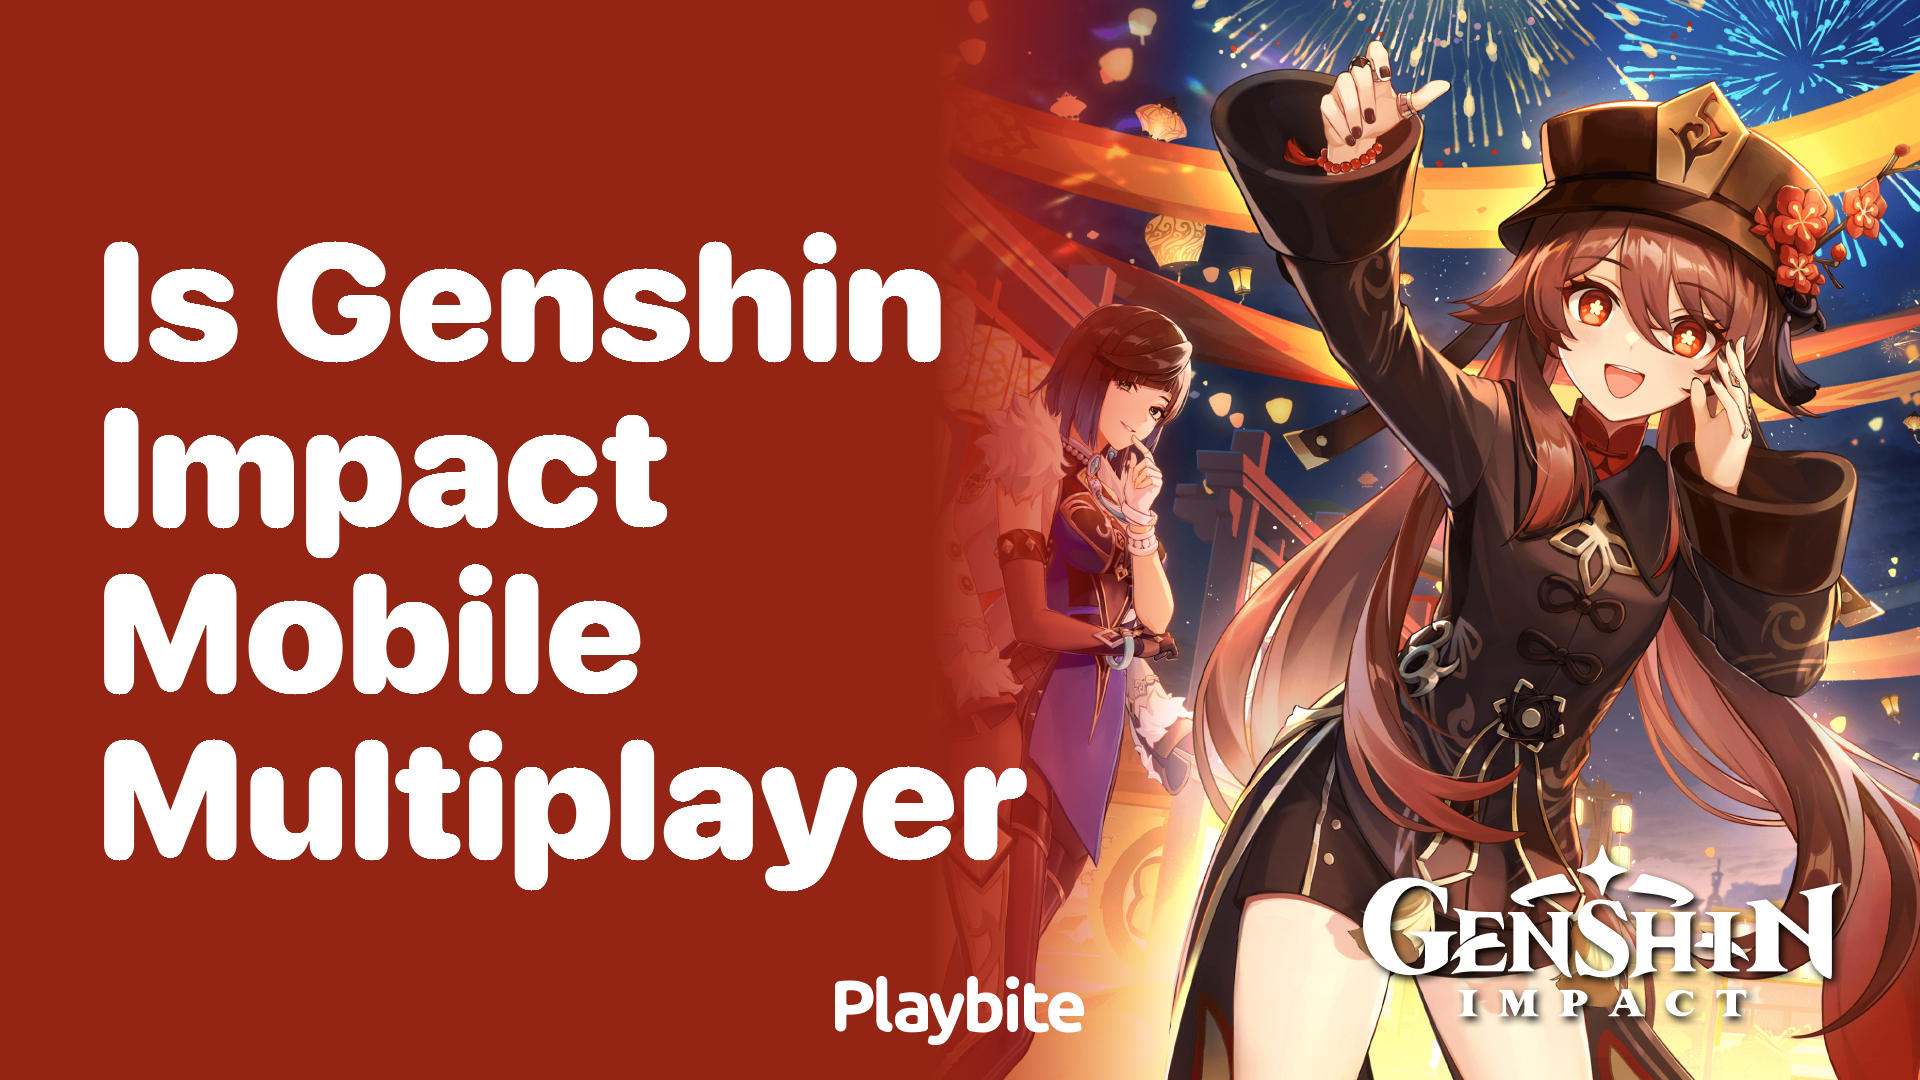 Genshin Impact Cross-Platform Play: Play with Friends on PC, PS4, PS5, and  Mobile